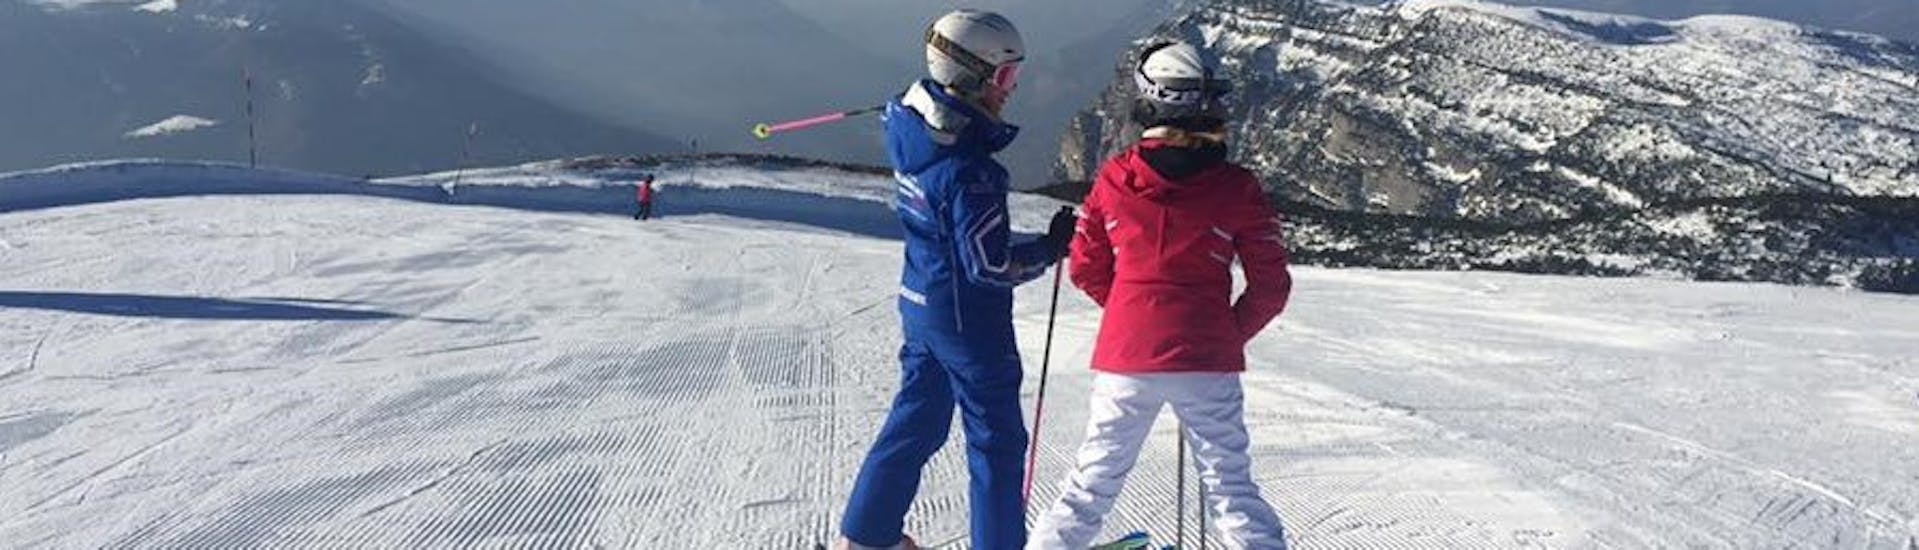 Ski instructor and participant in Andalo during one of the Private Ski Lessons for Adults of All Levels.